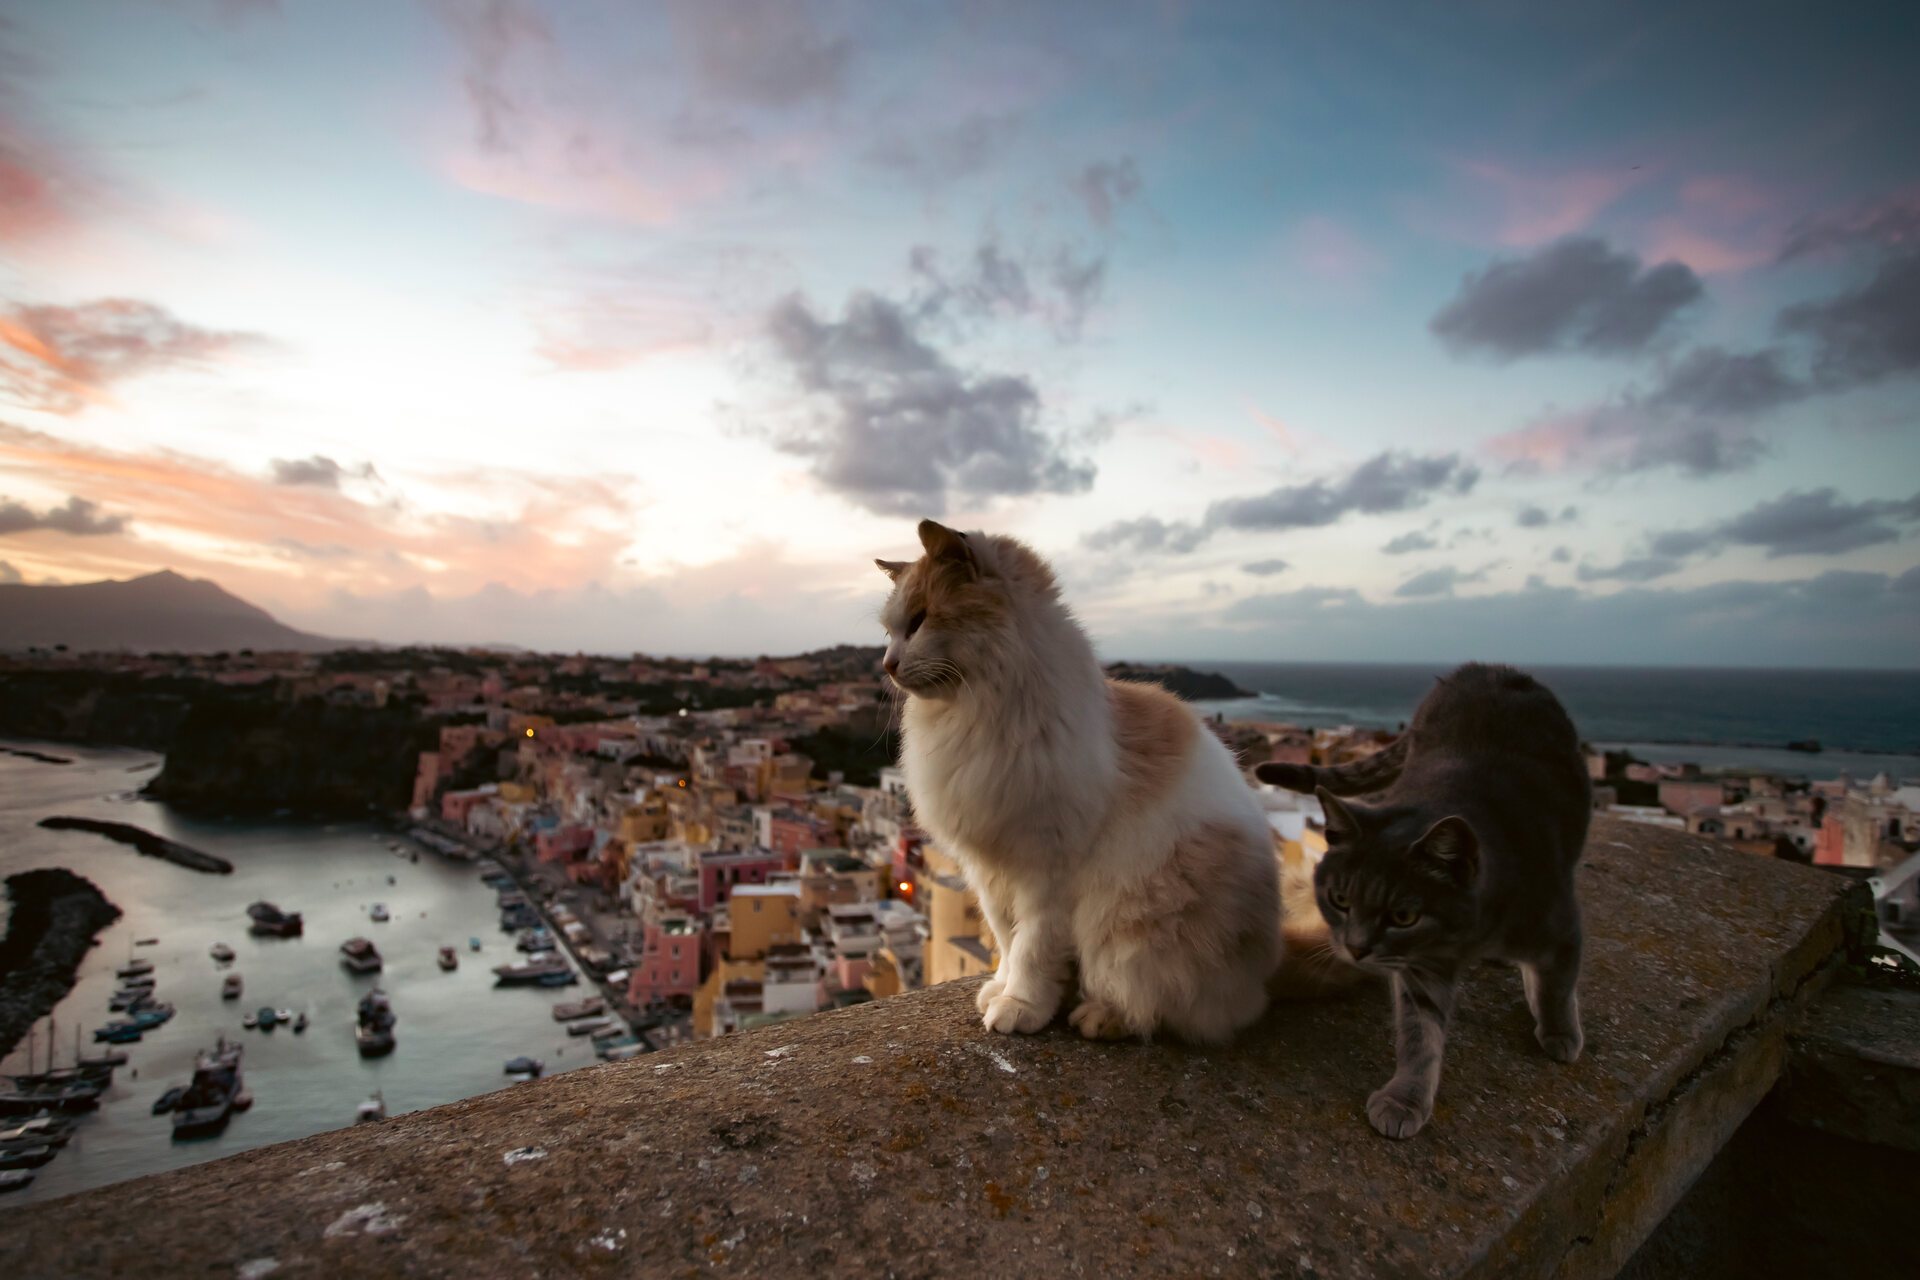 Two cats sitting on a bridge overlooking a city